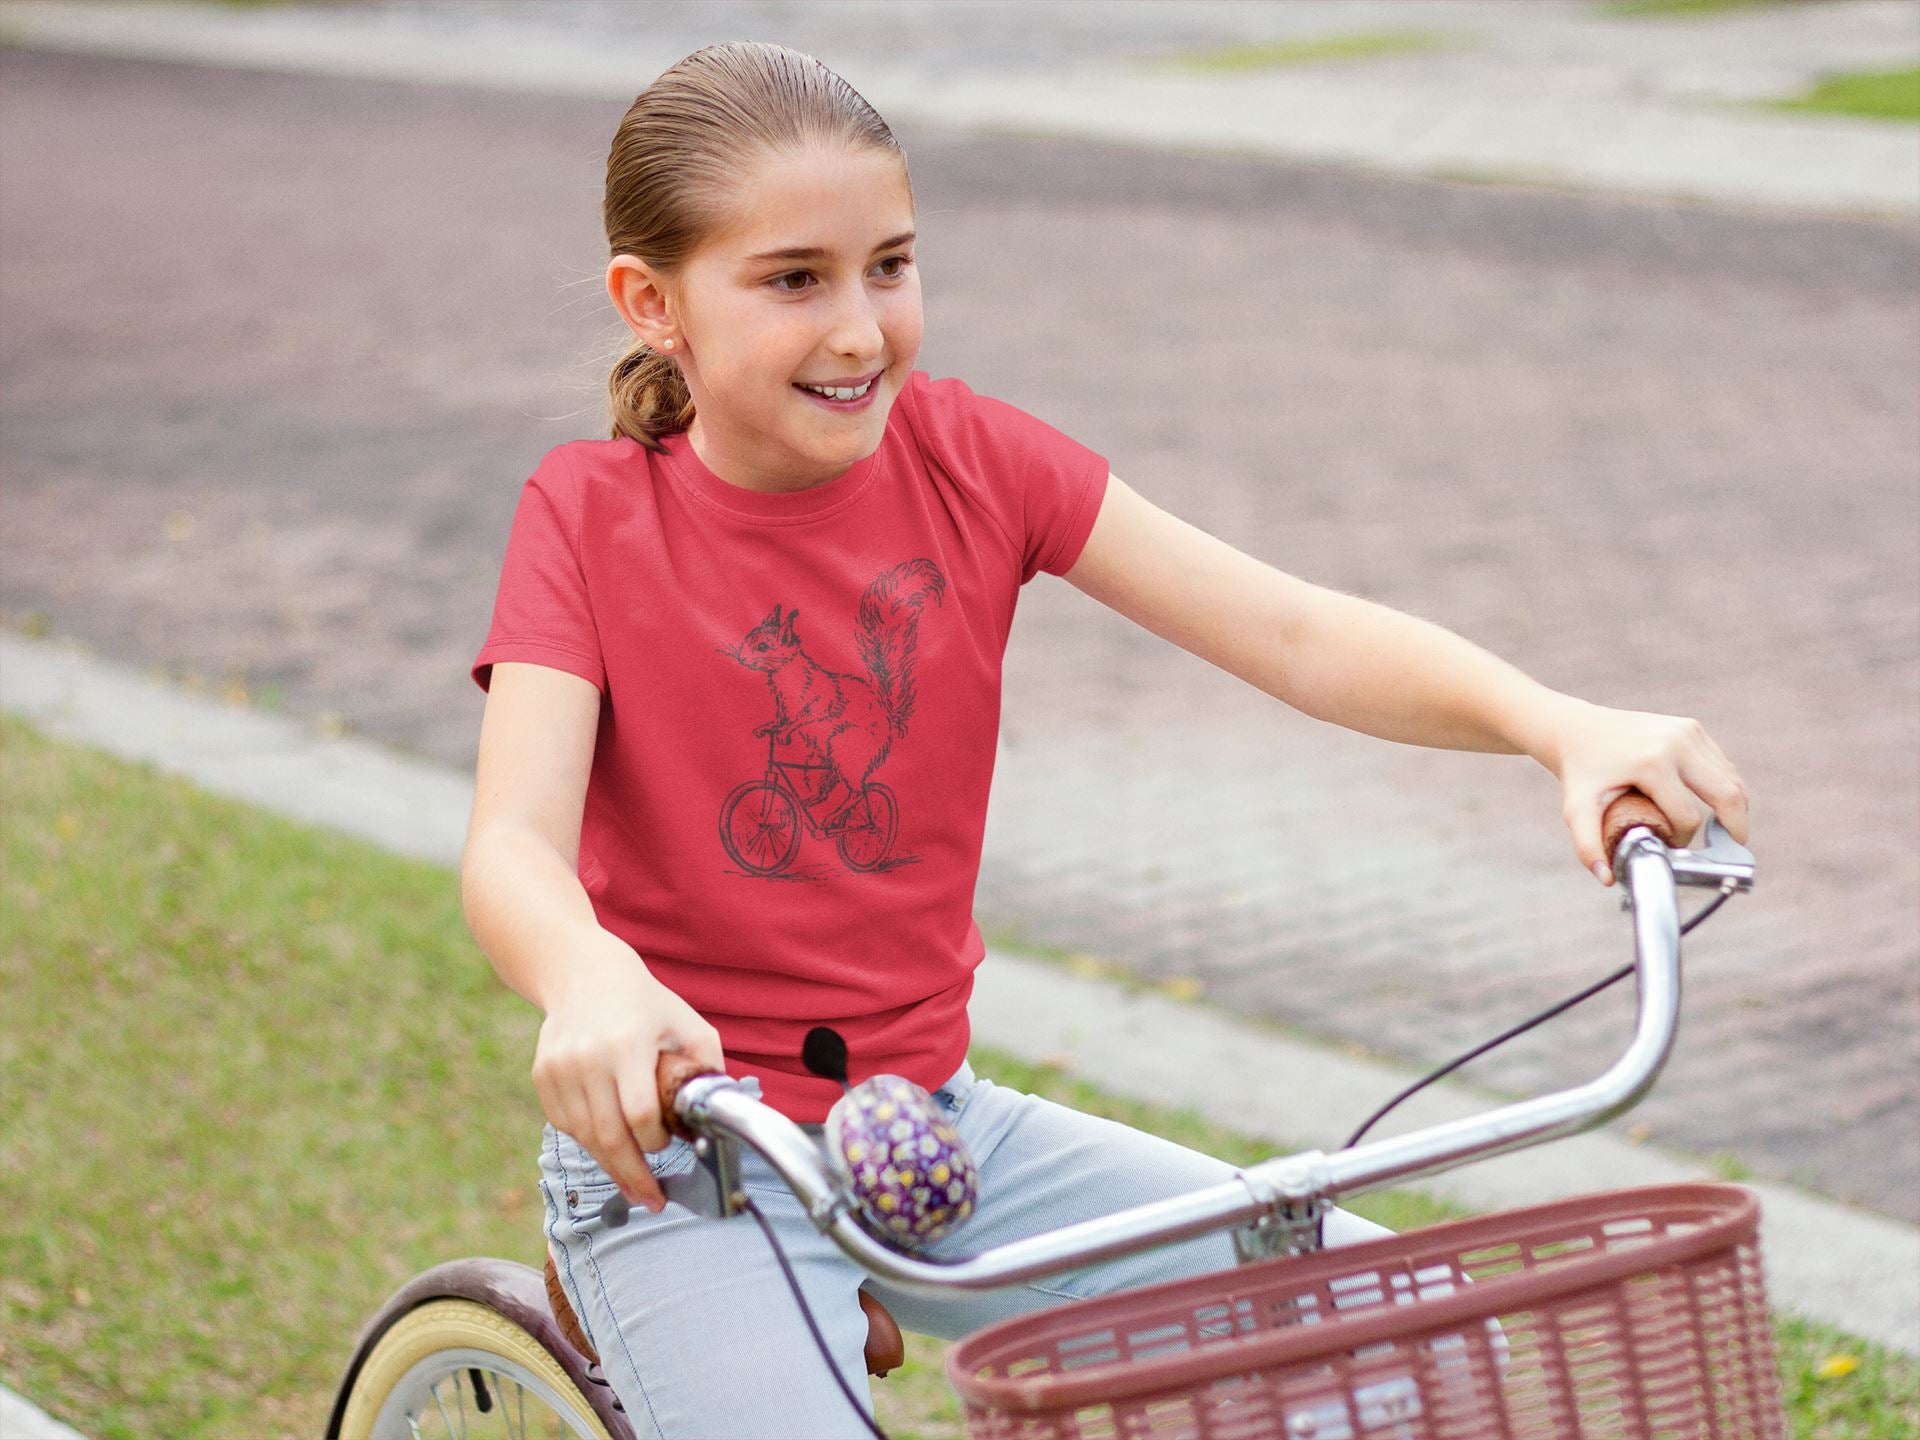 Squirrel Riding Bike Shirt and bodysuit - Kids - House of Swank